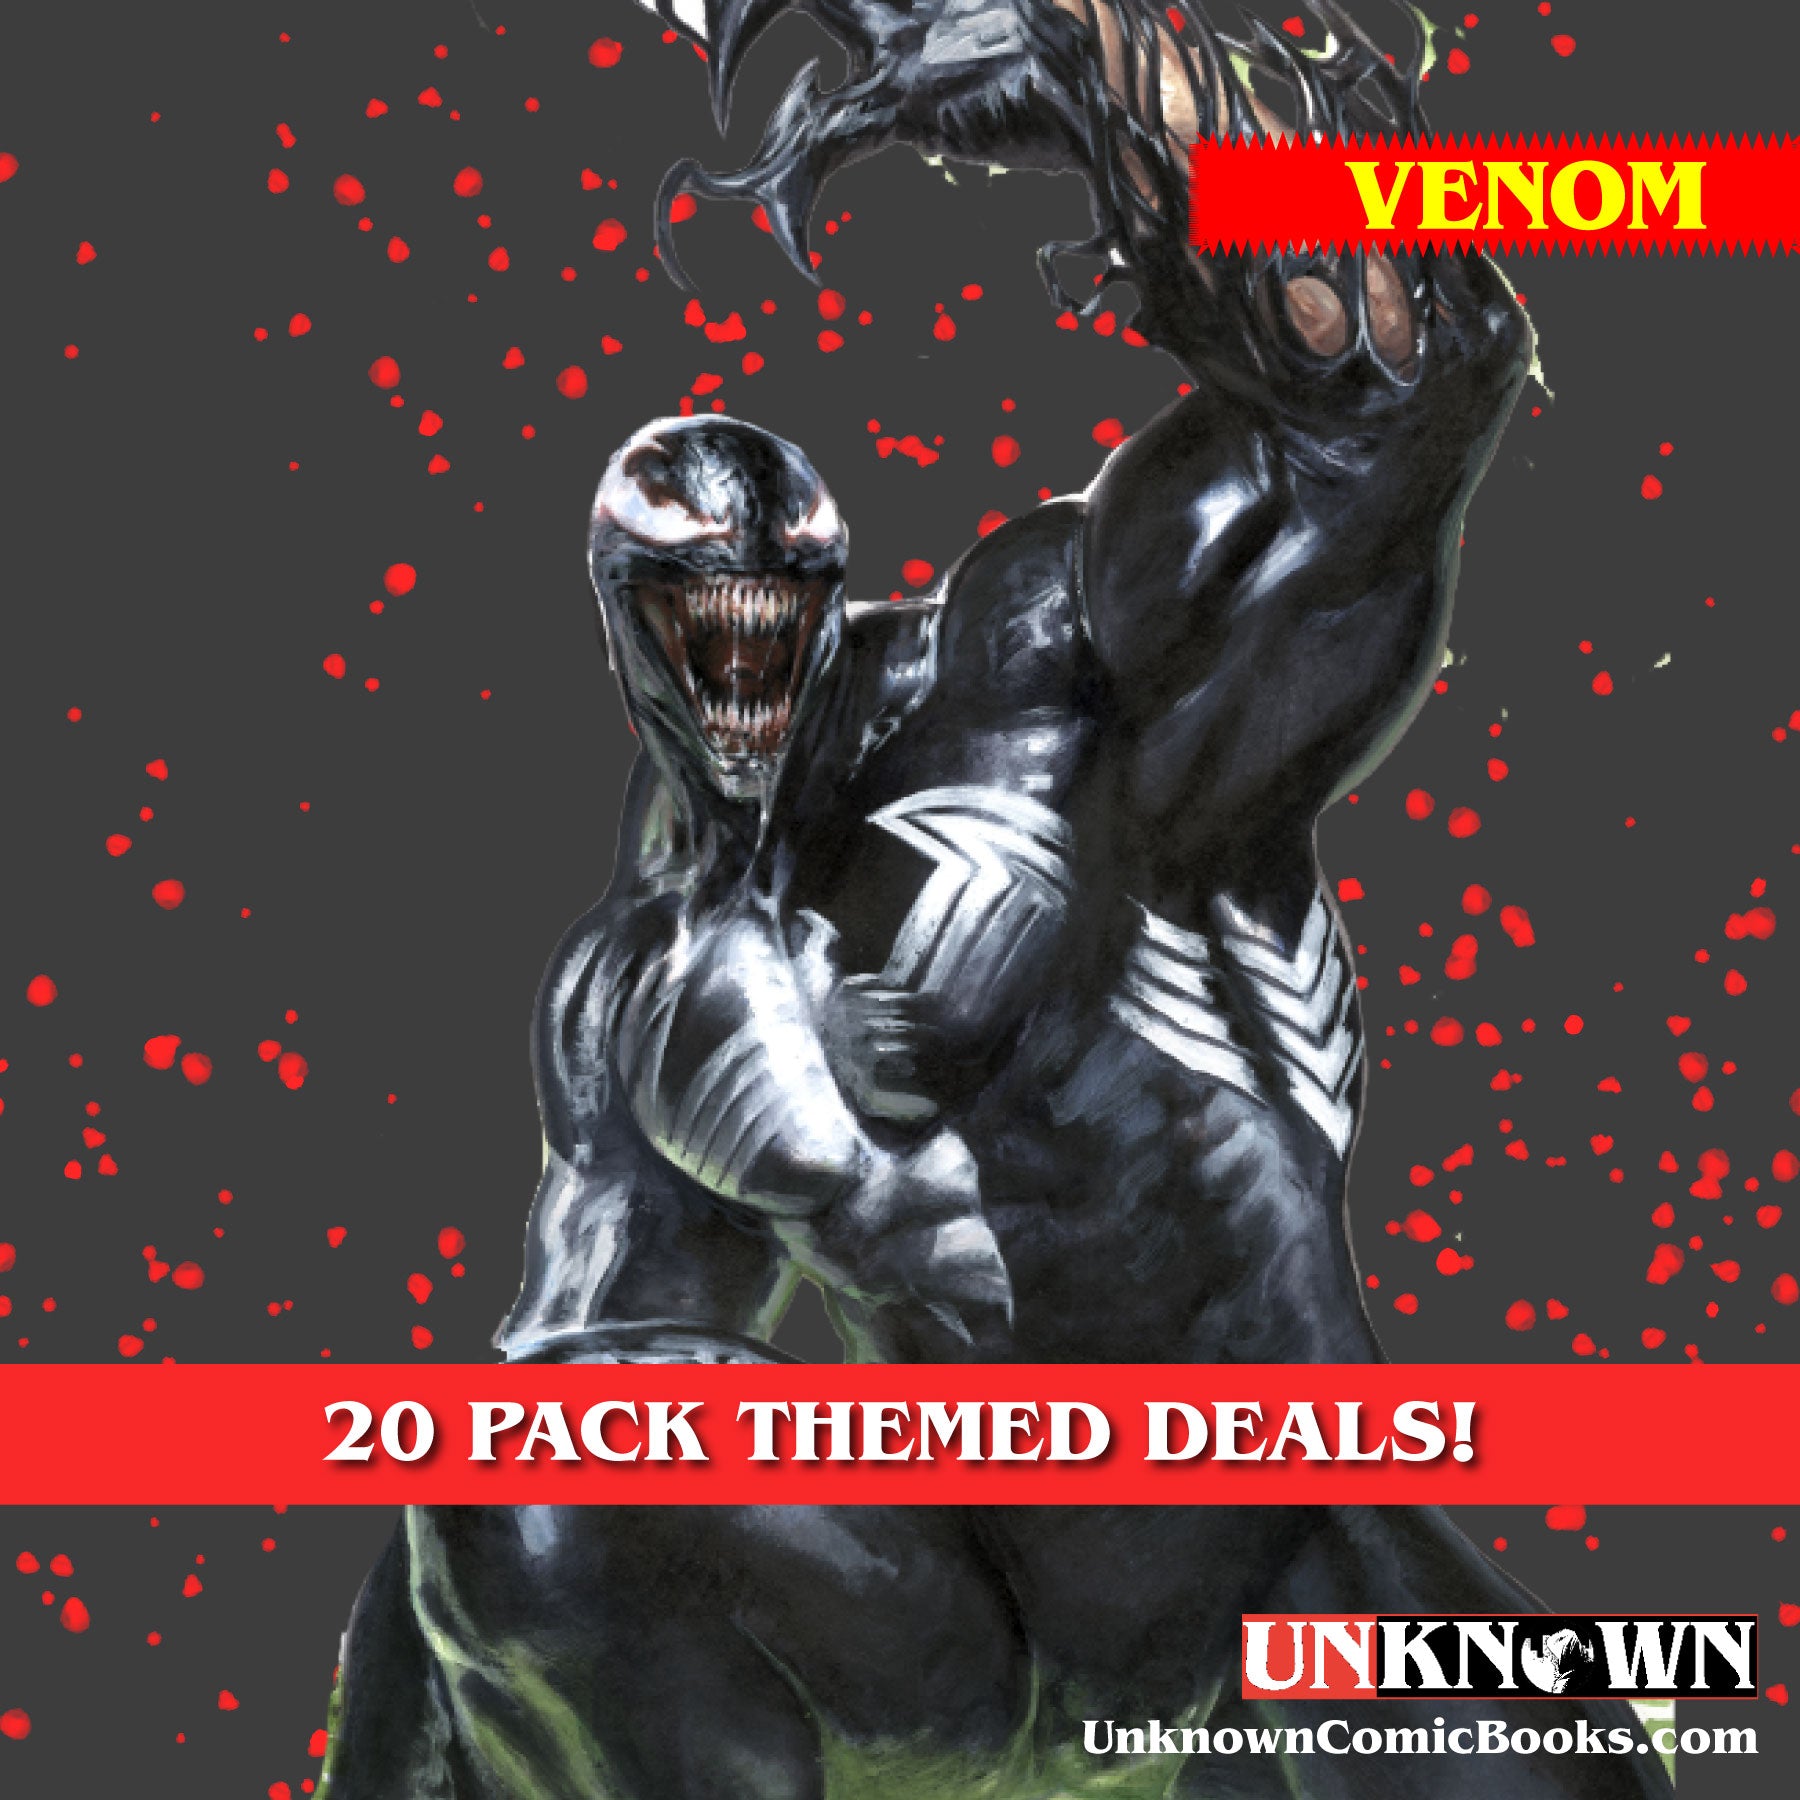 [20 PACK] UNKNOWN COMICS MYSTERY THEMED 👉VENOM EXCLUSIVE BOX 👉VIRGIN (01/11/2023)